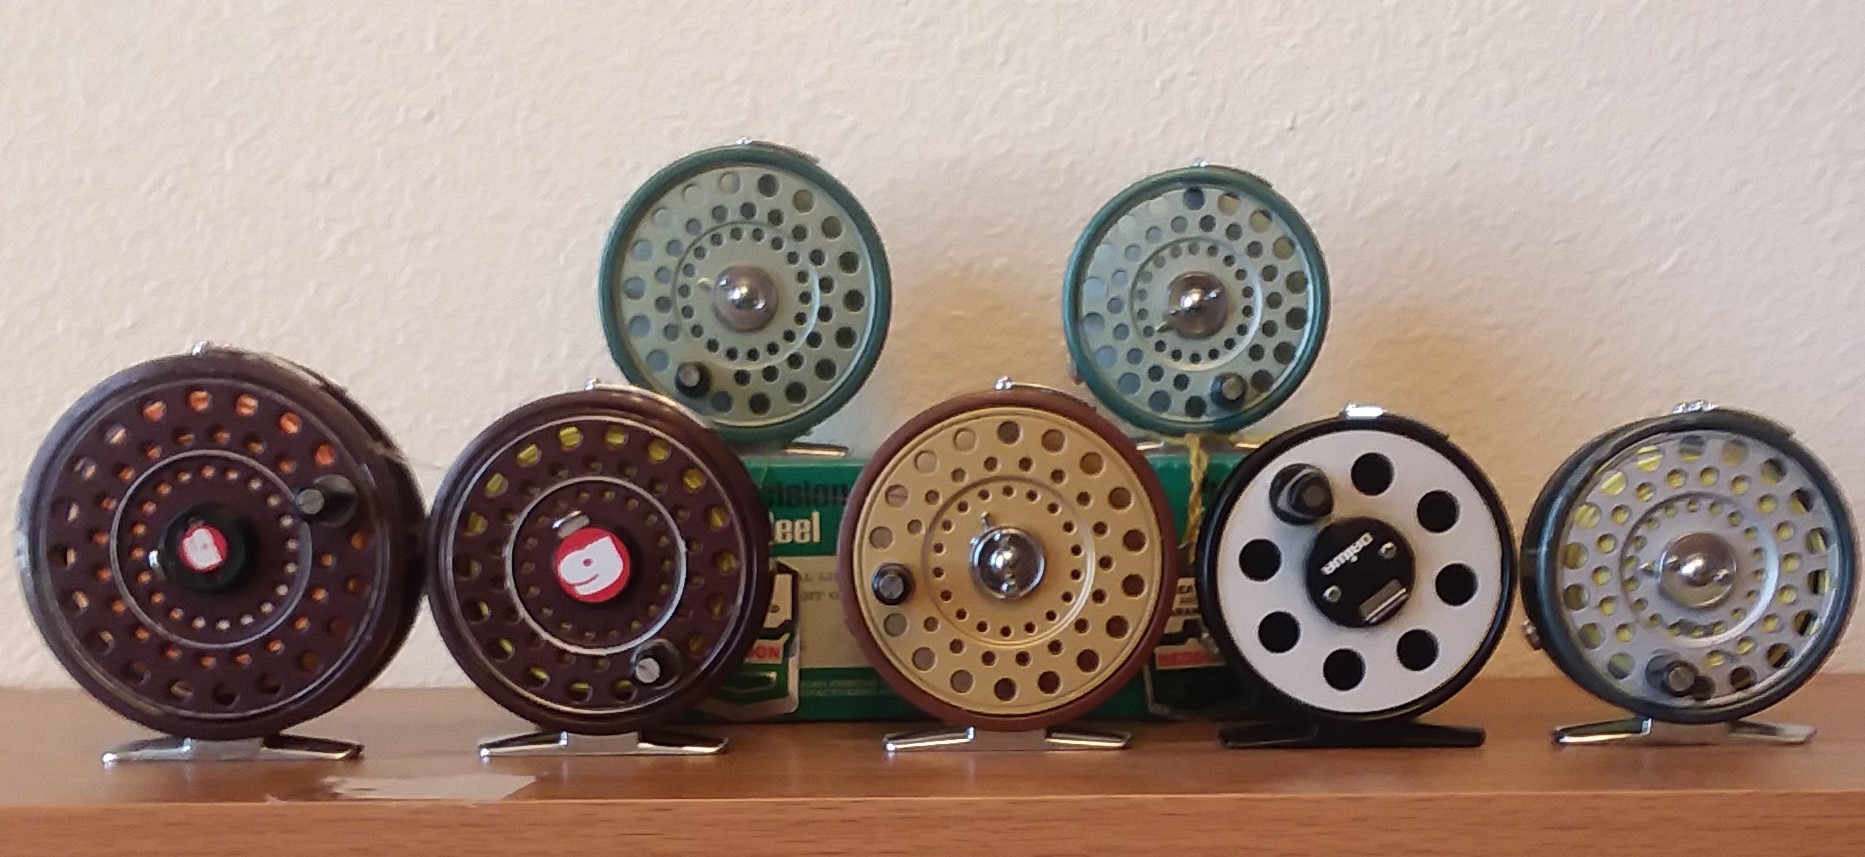 My Hardy Clones, Classic Fly Reels